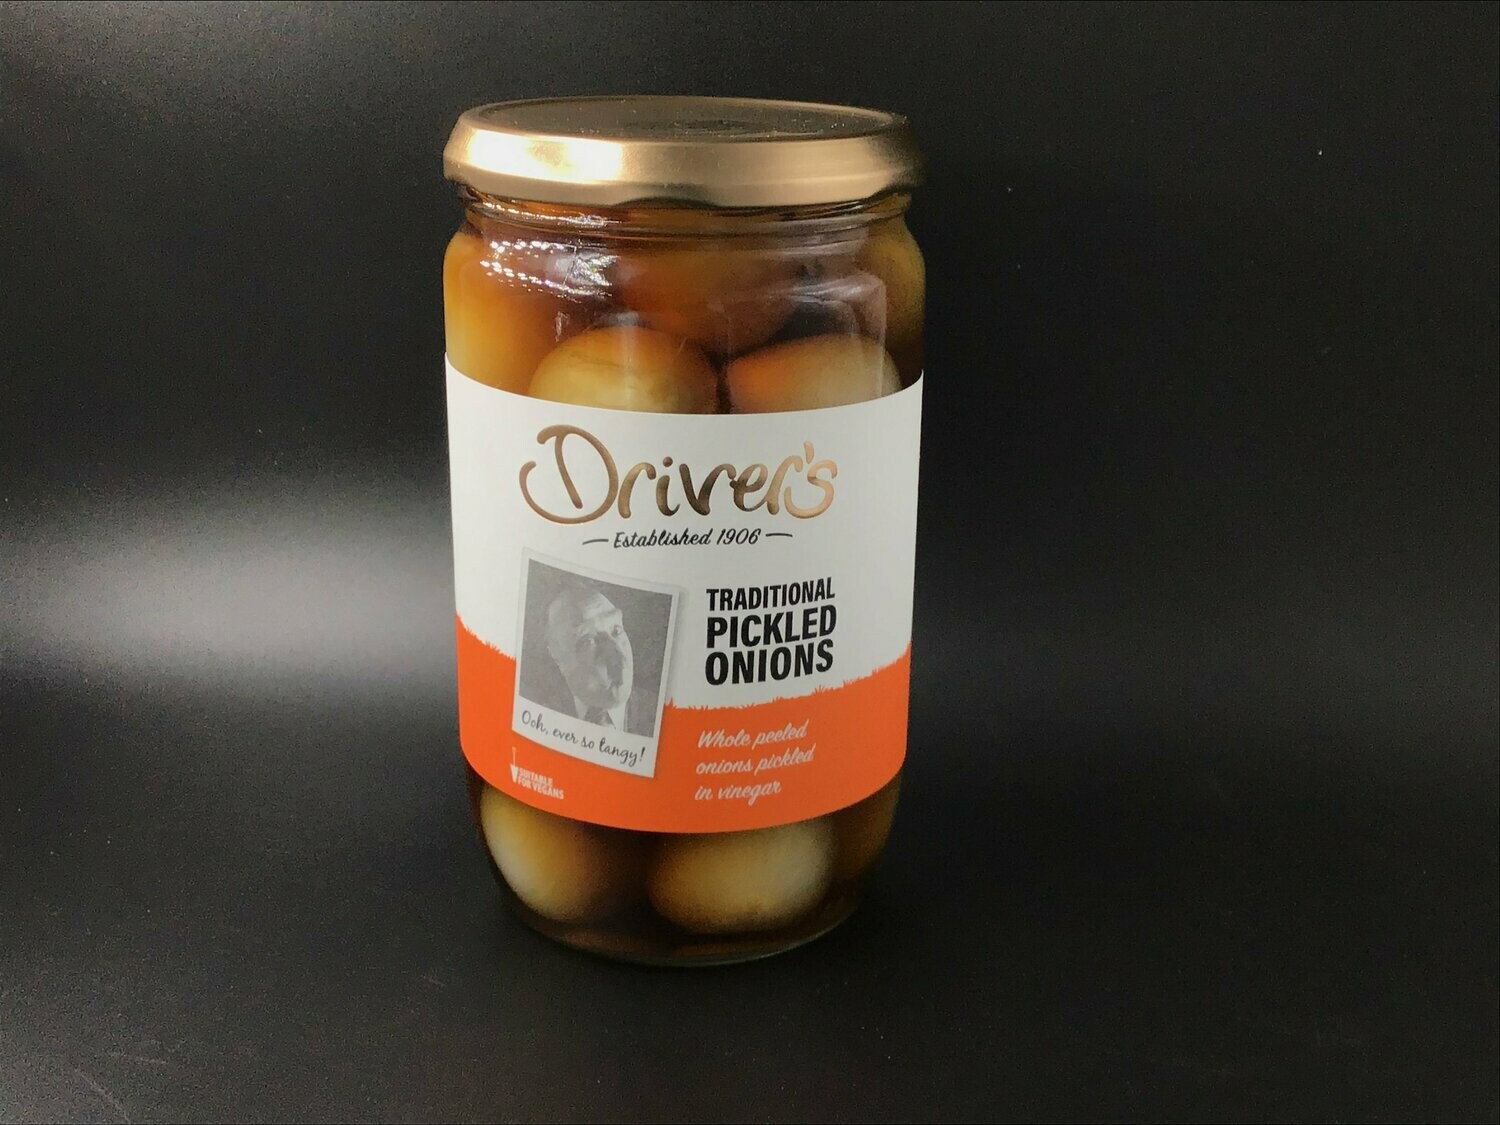 Drivers "Traditional Pickled Onions" 710g